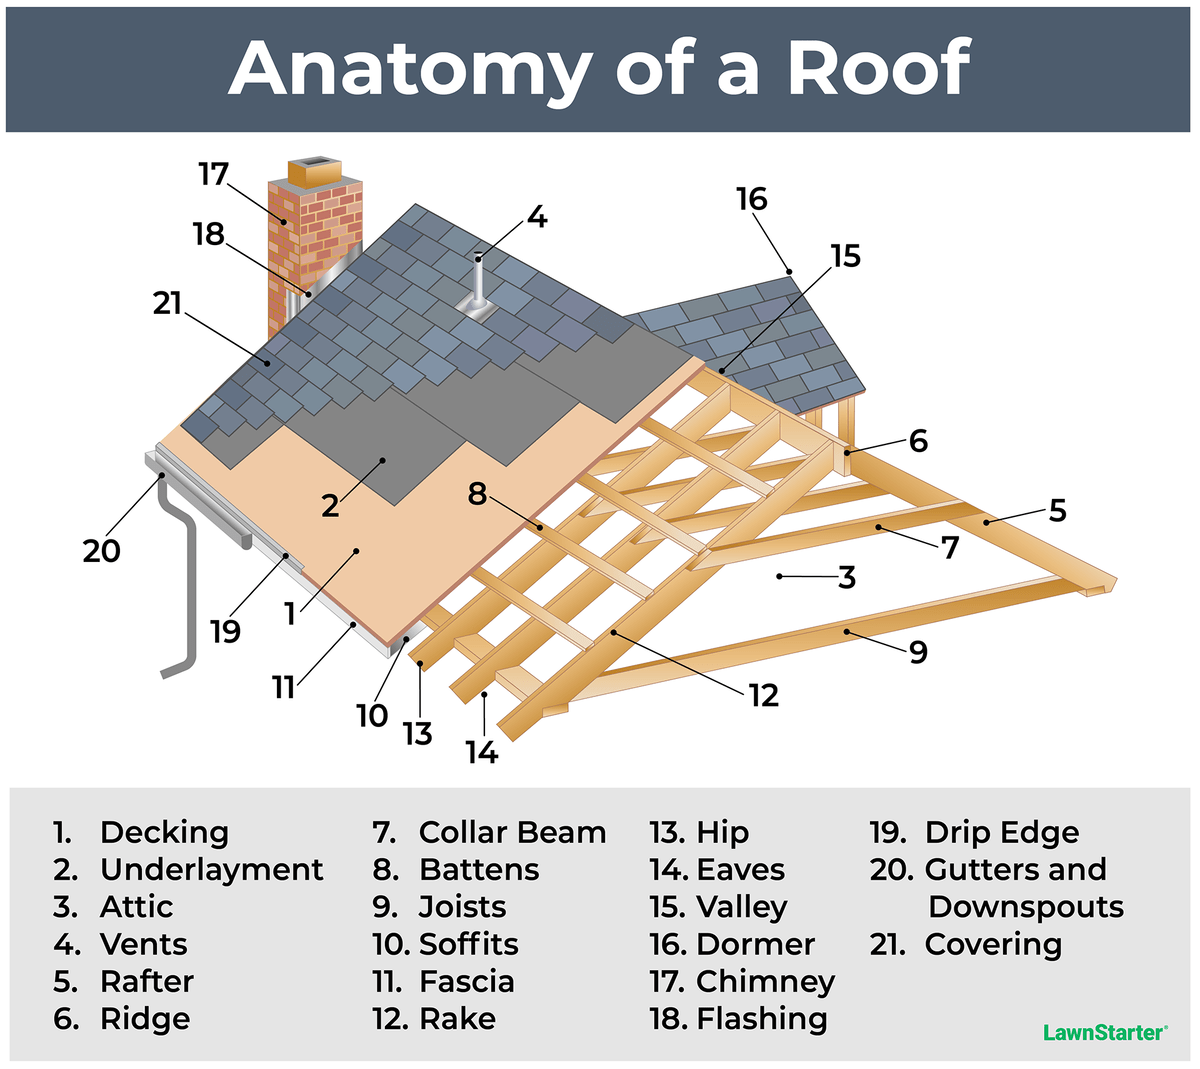 Anatomy Of A Roof 1 